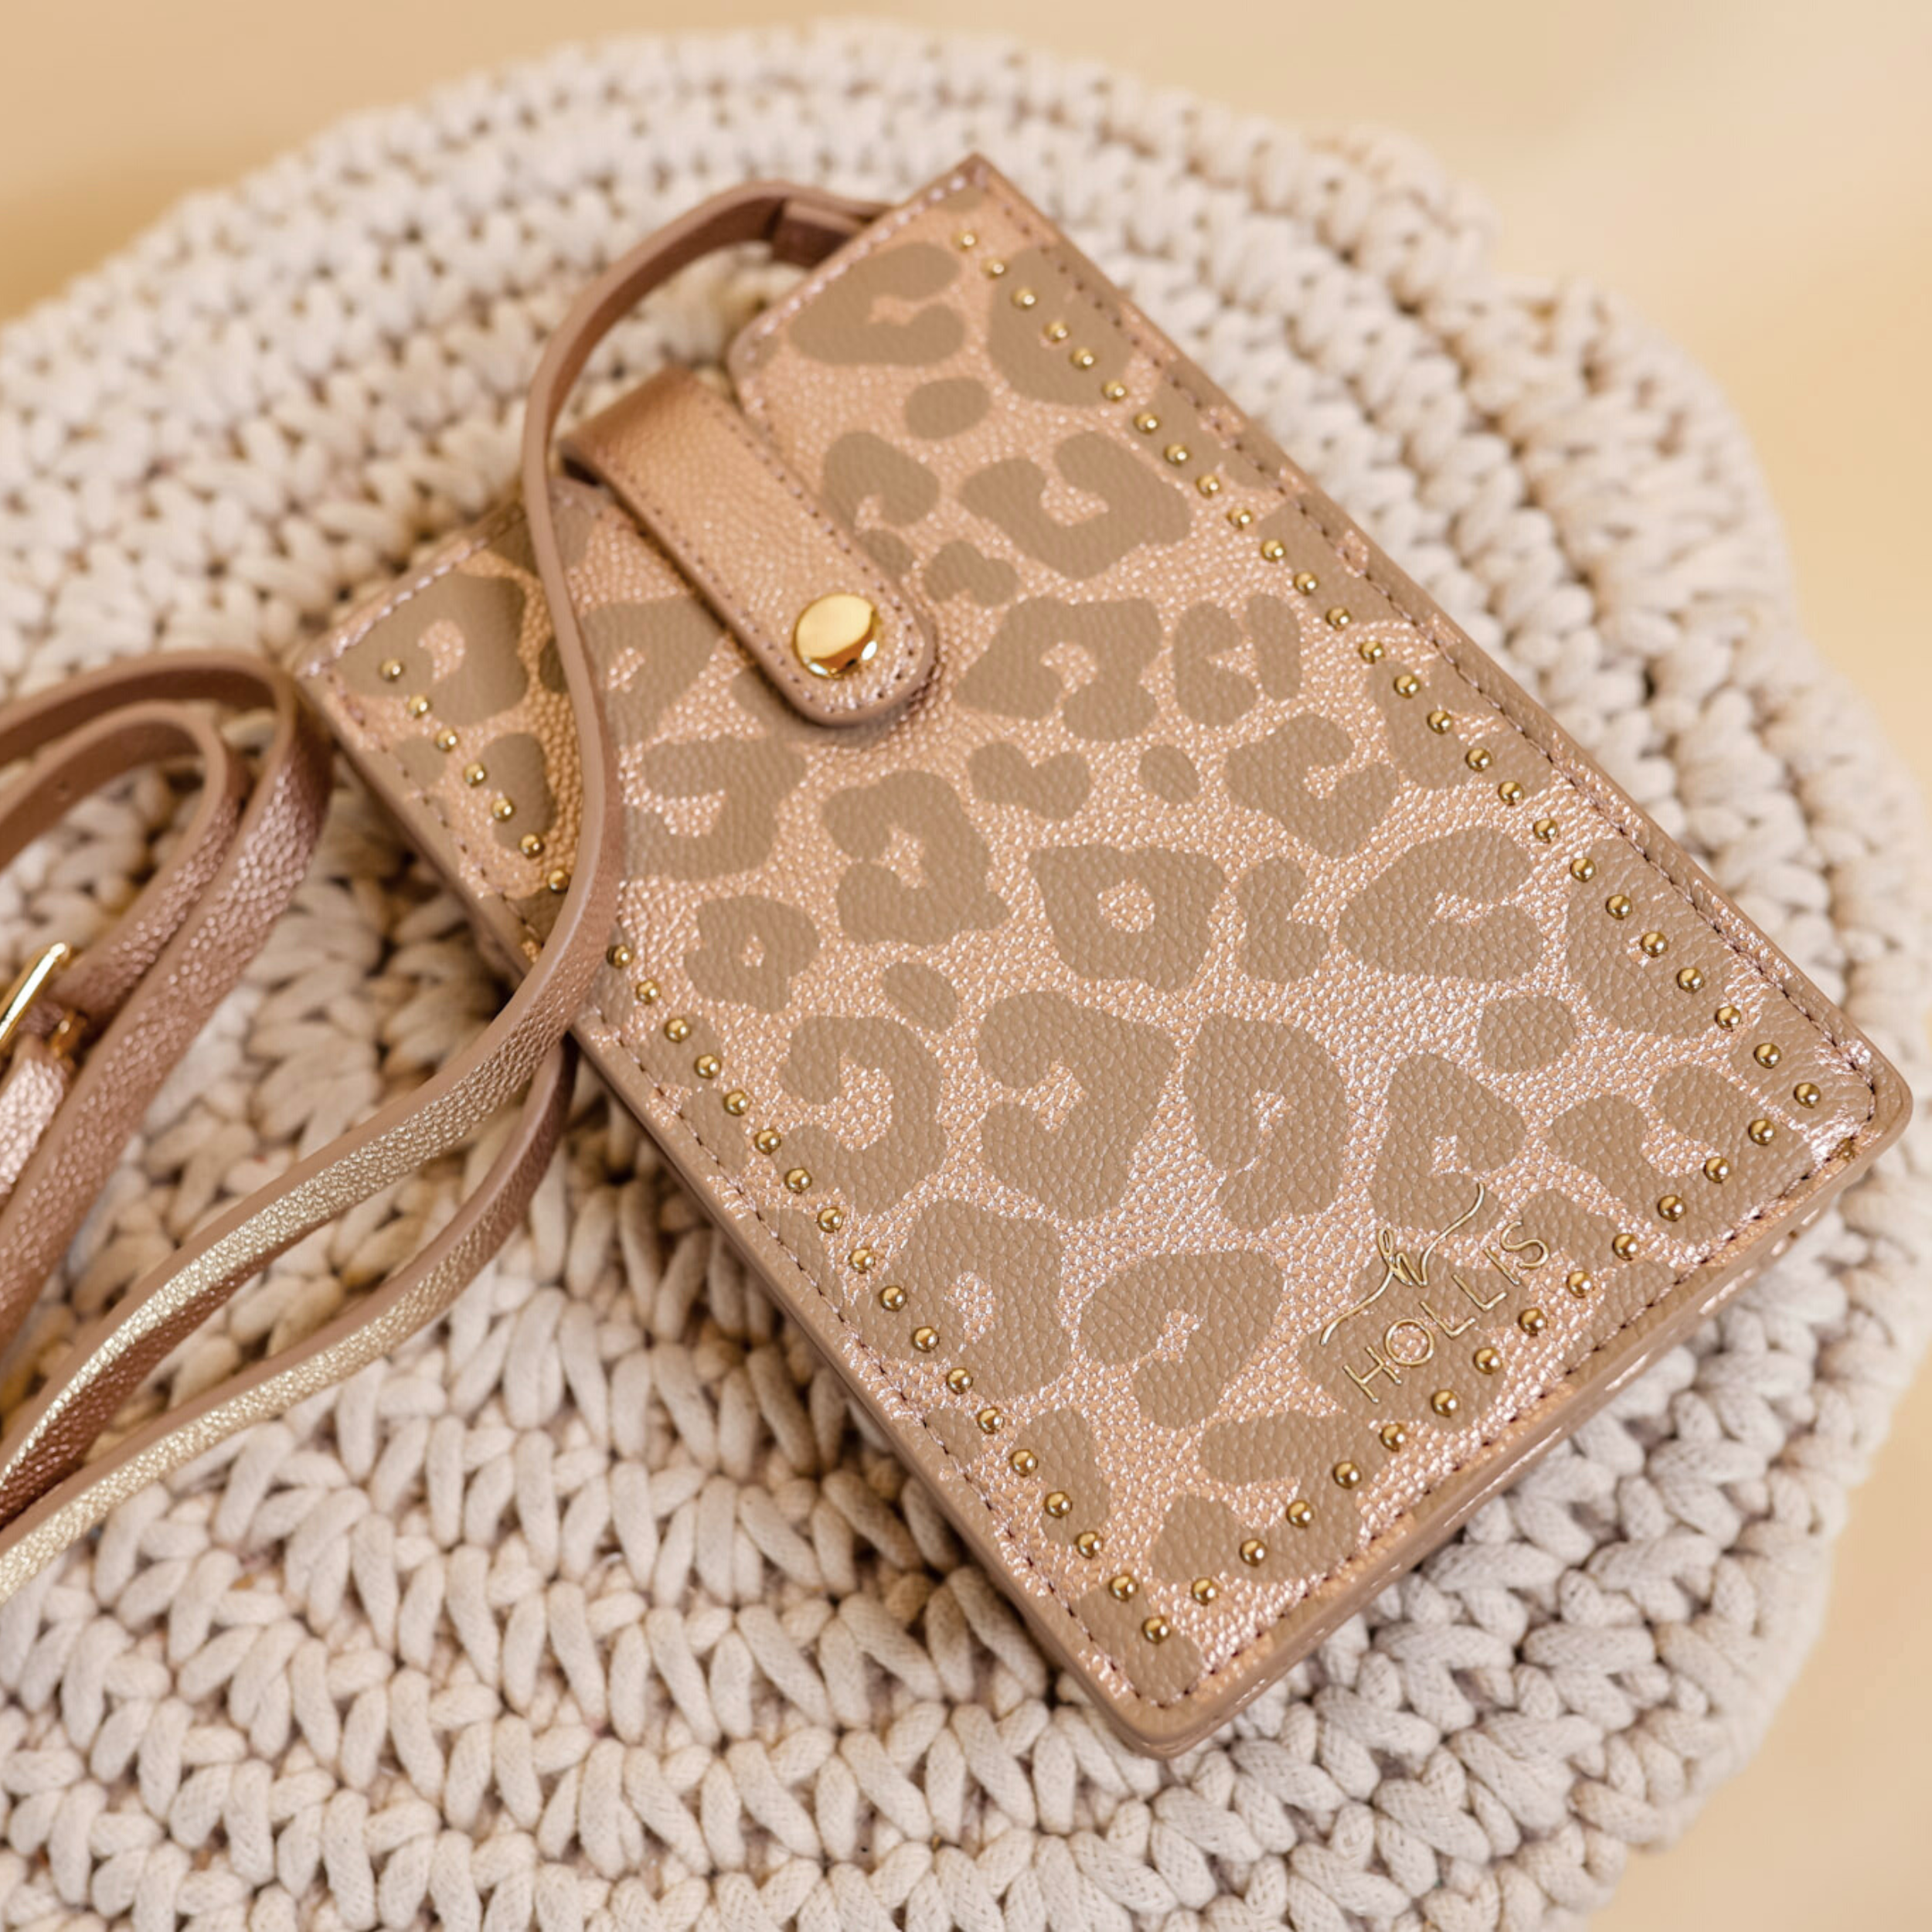 Hollis | Call You Later Crossbody Purse in Leopard